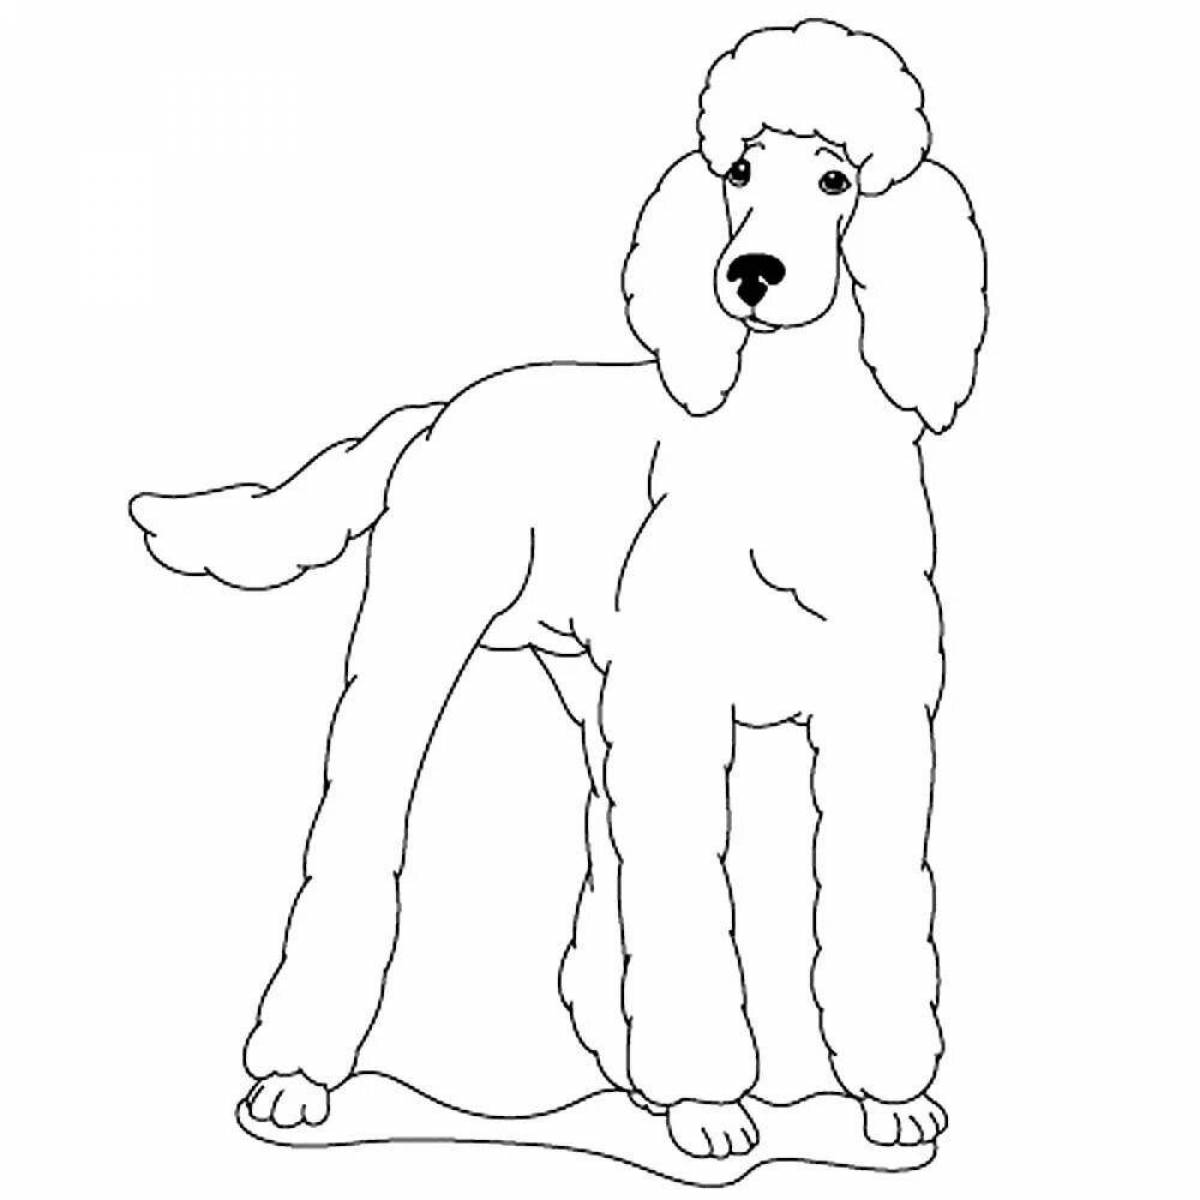 Fairy poodle coloring pages for kids